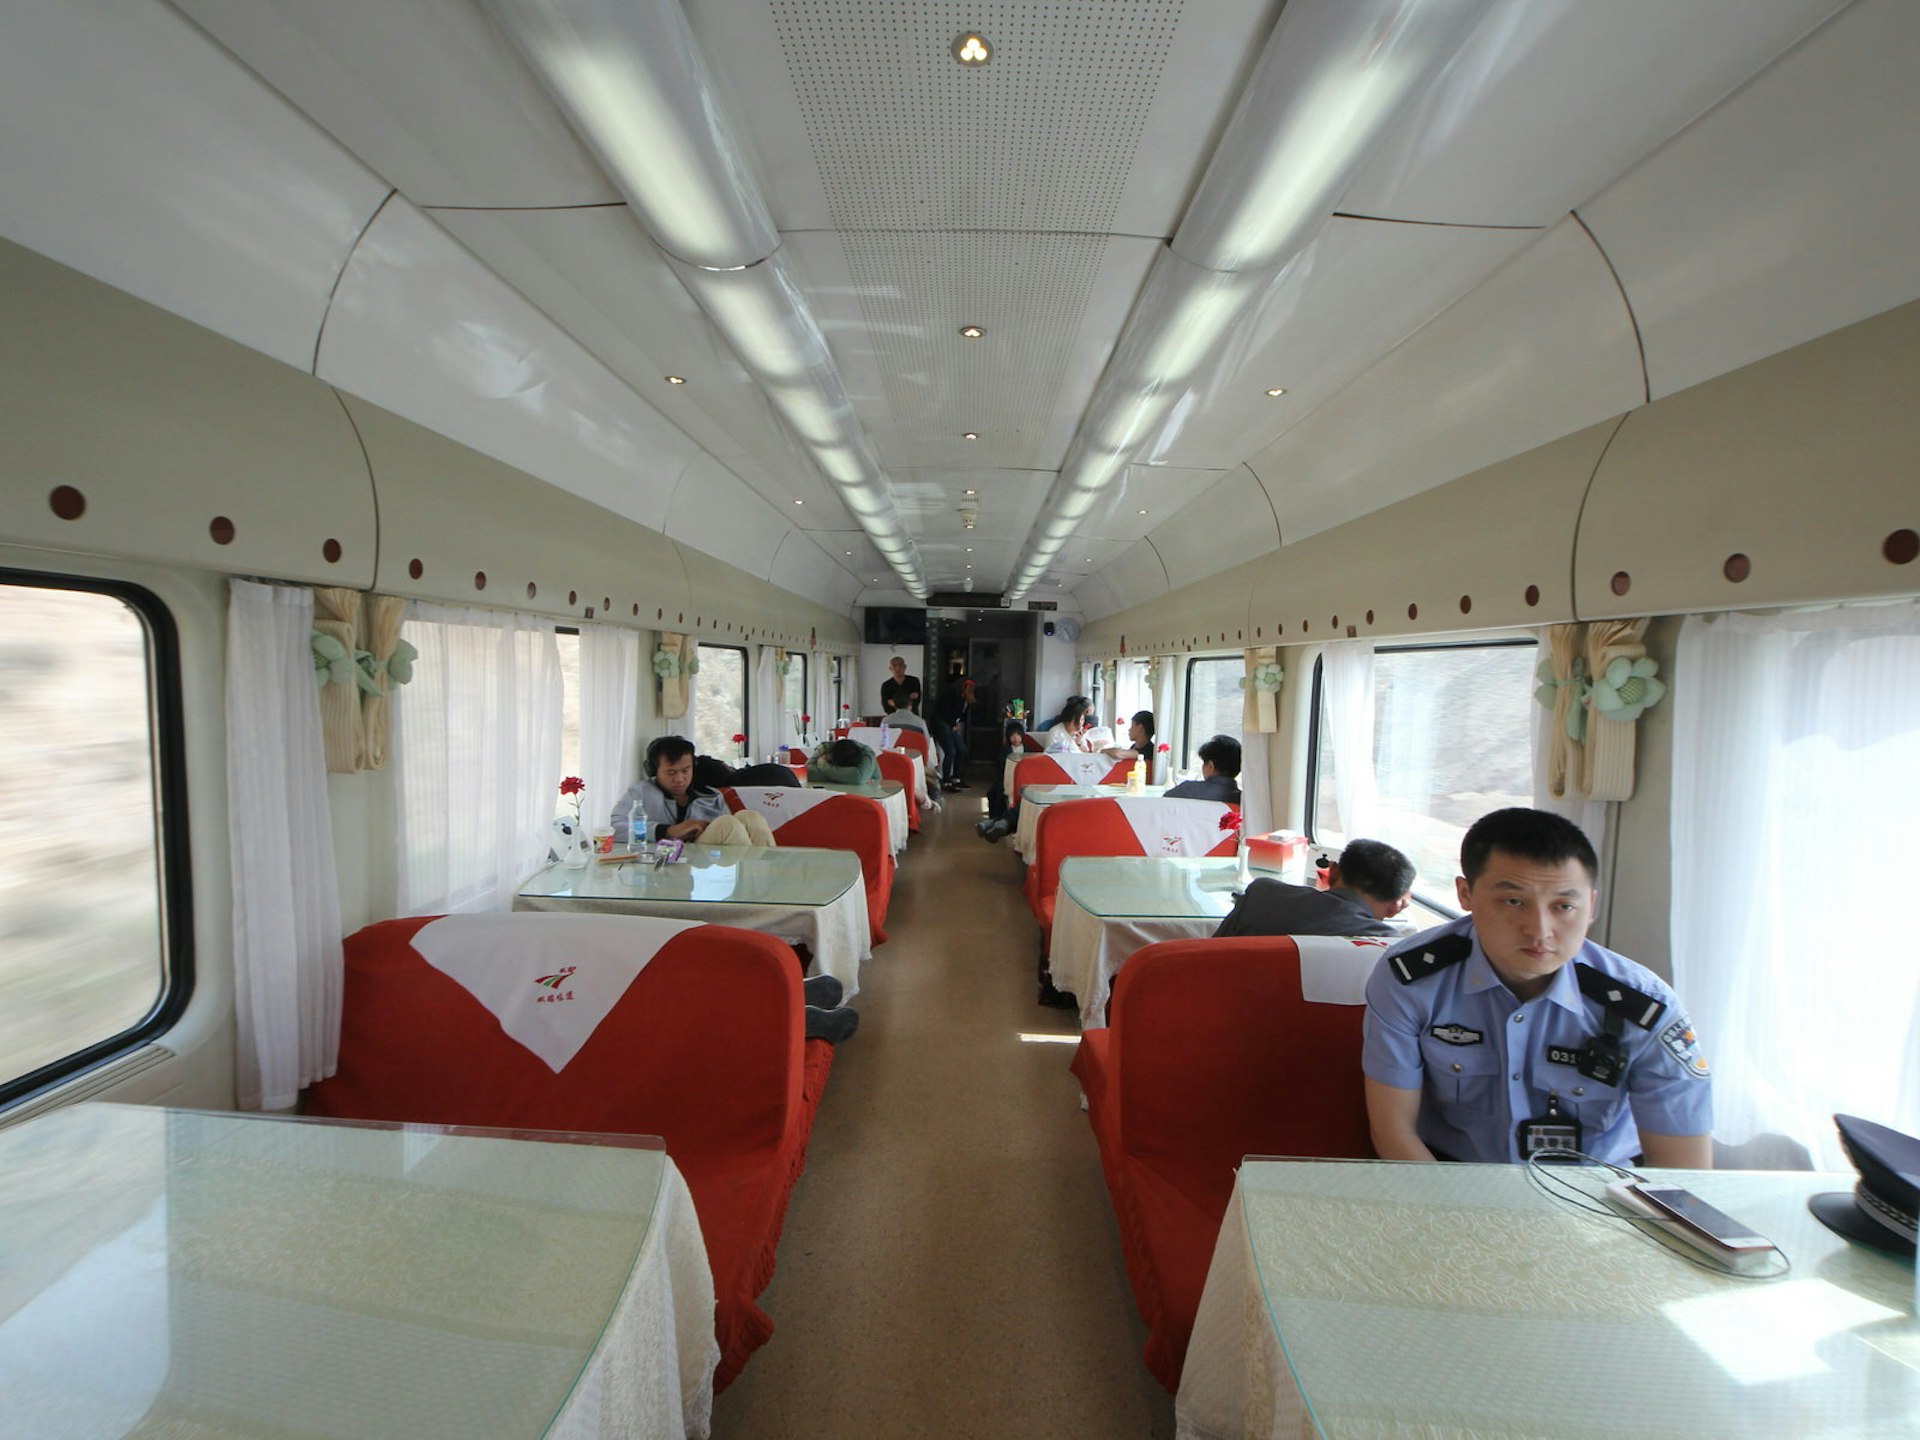 In the on-board restaurant car, you can order hot meals and drinks © Nellie Huang / Lonely Planet